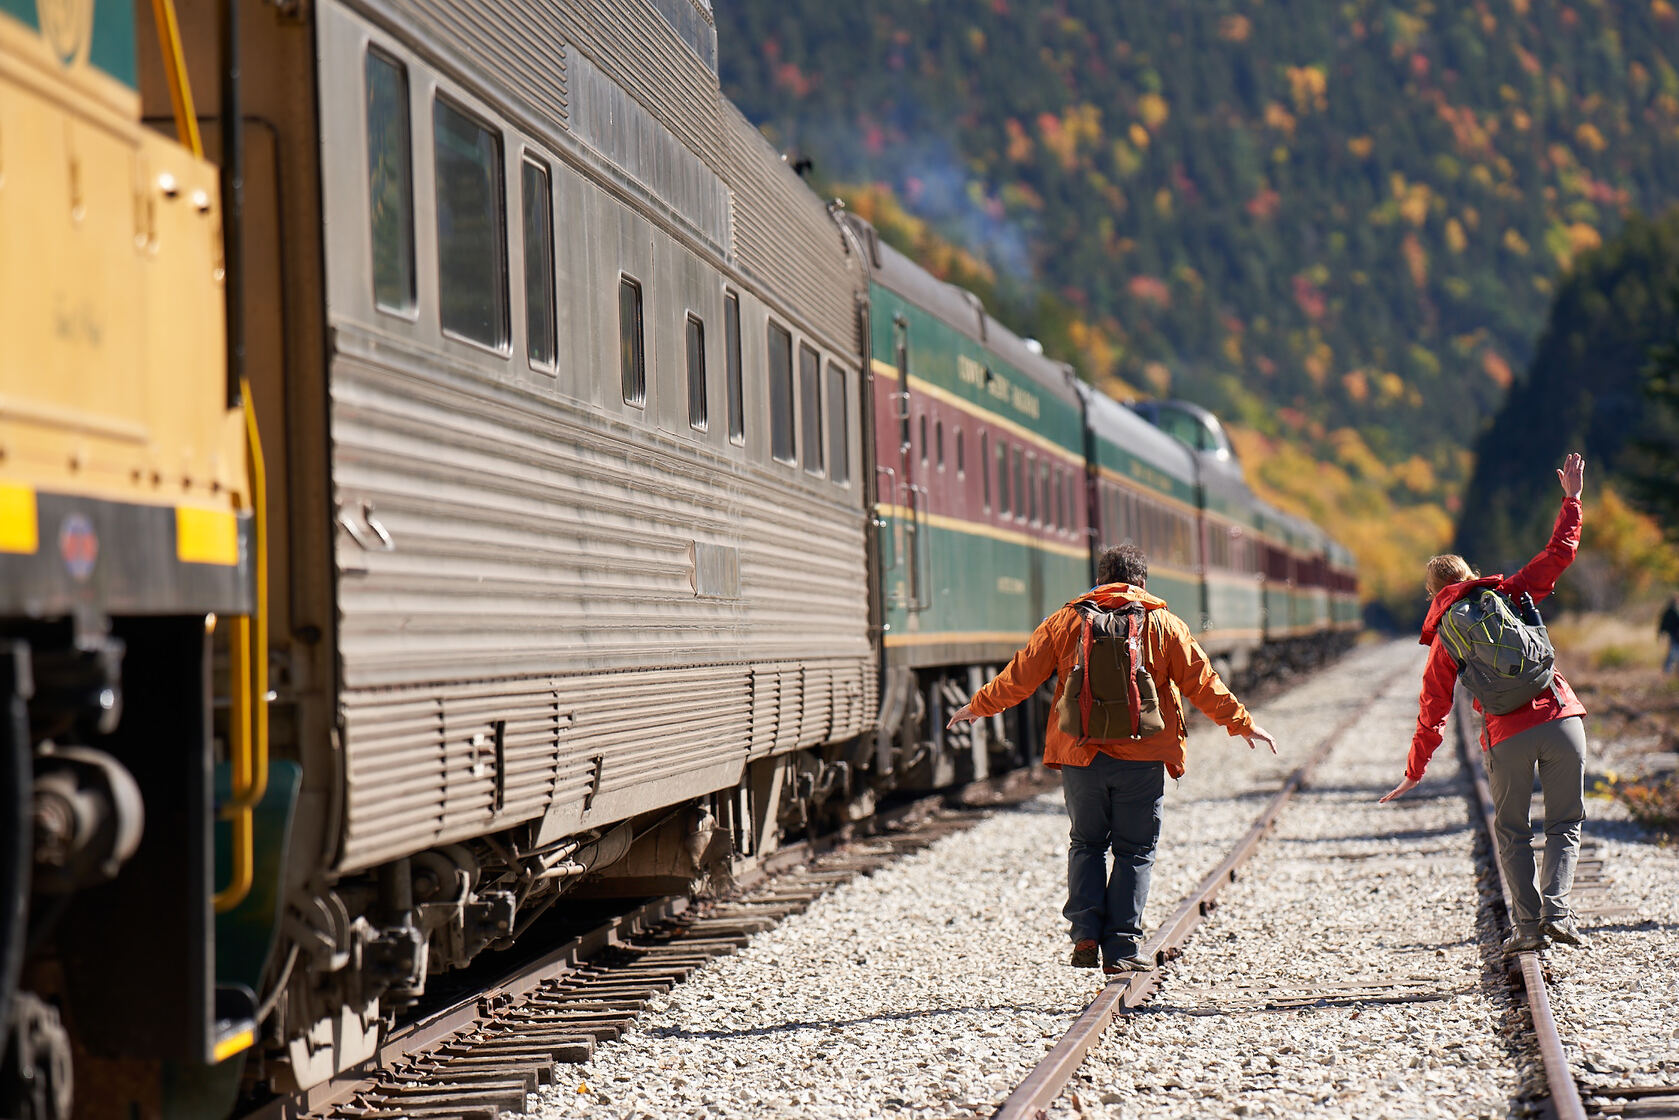 a man and woman walking next to a train in the mountains